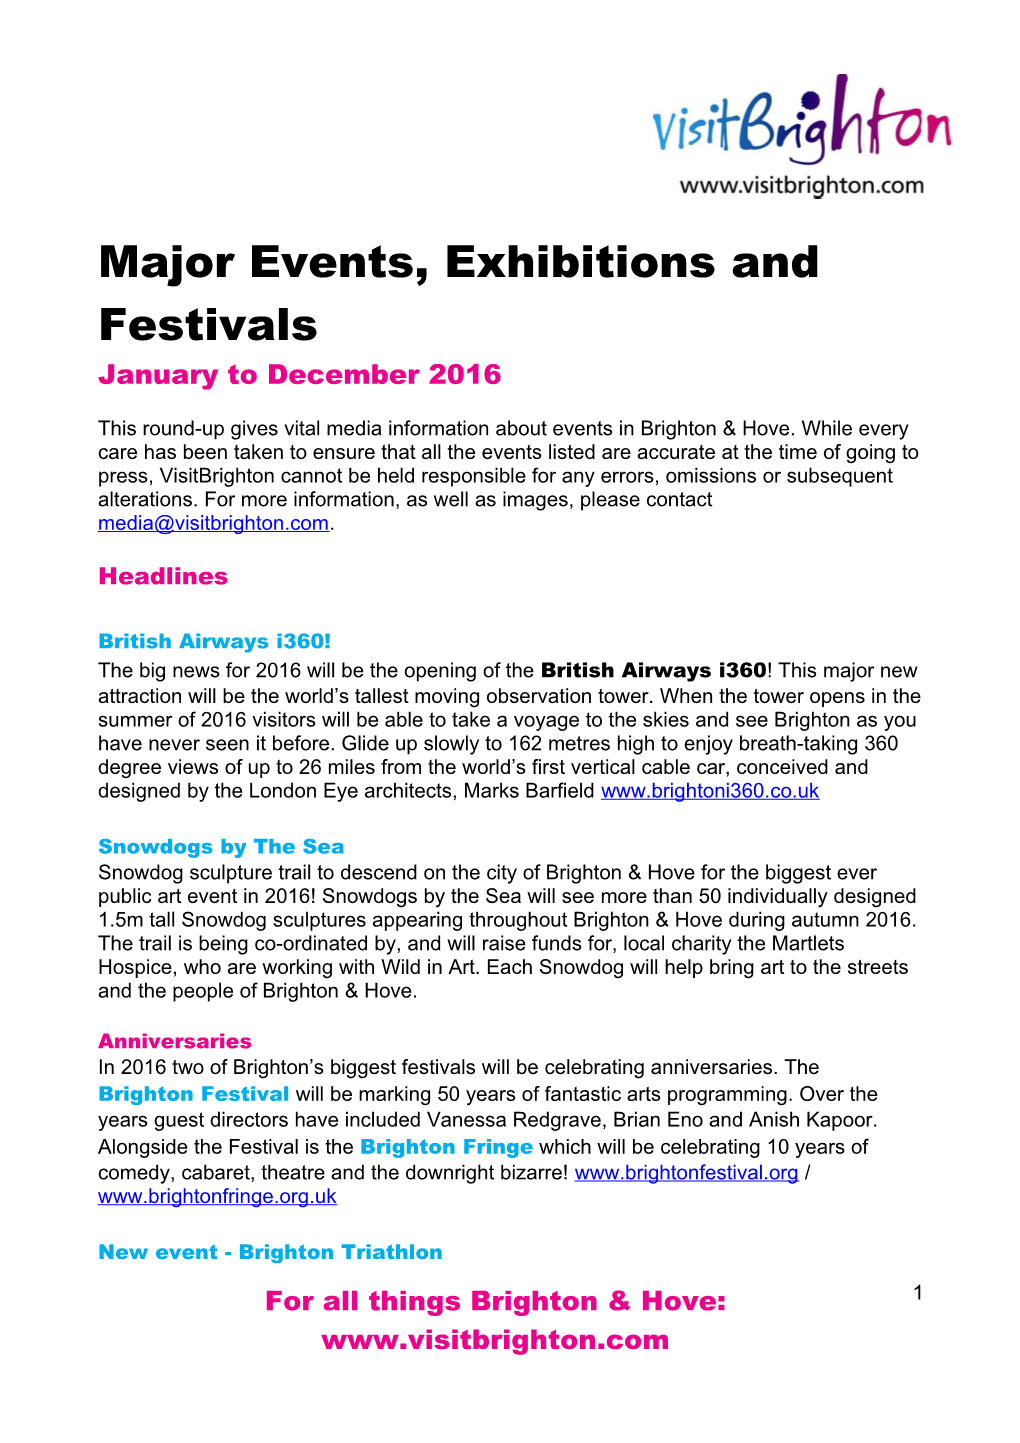 Major Events, Exhibitions and Festivals